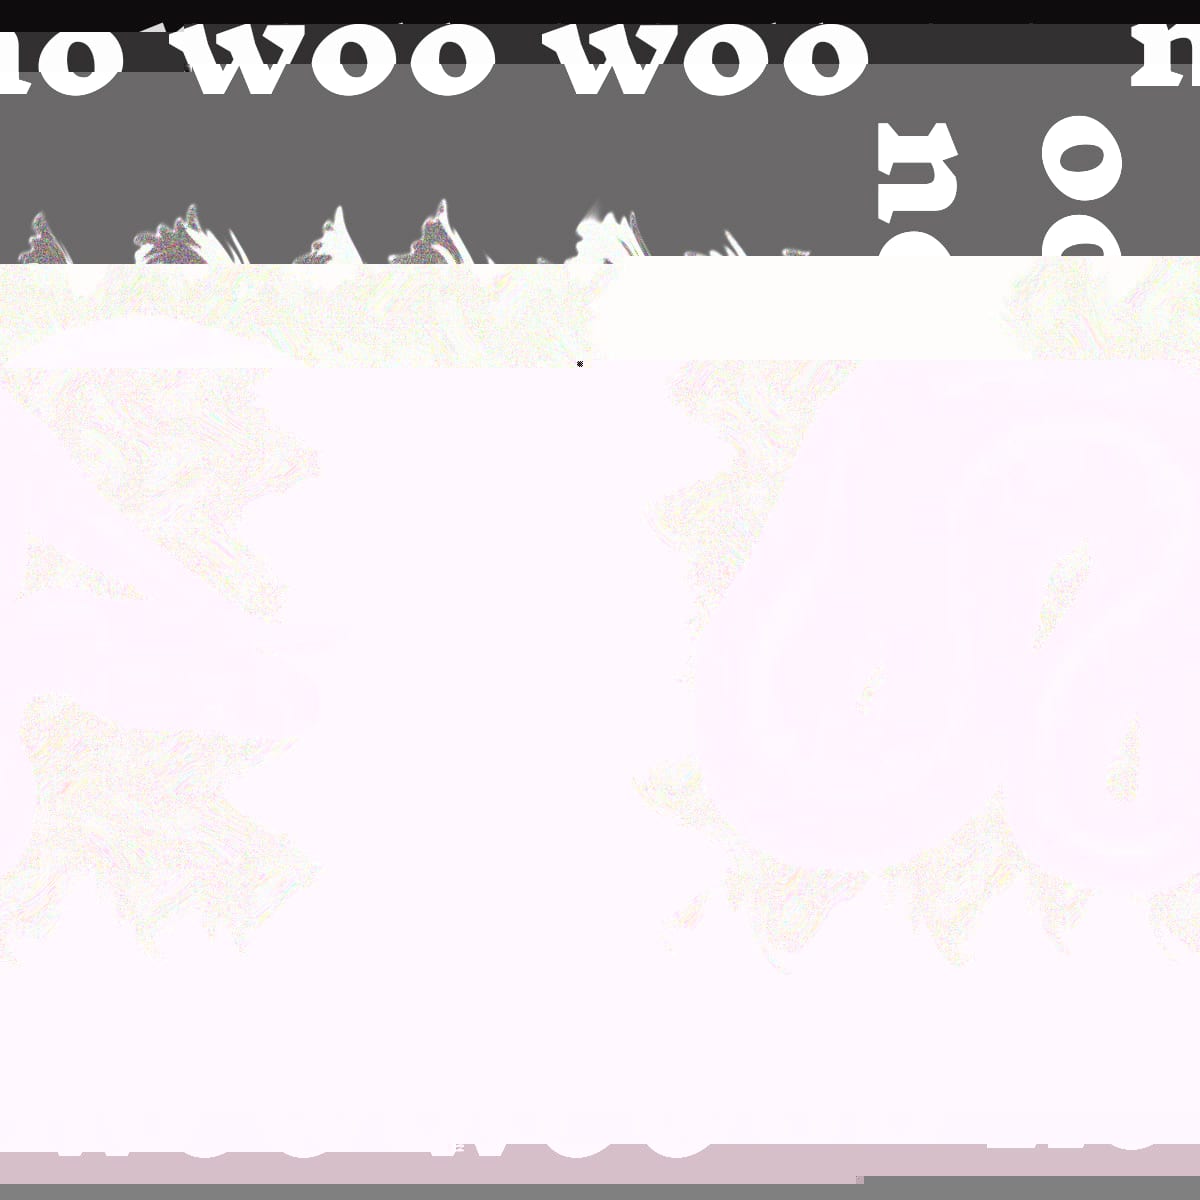 second glitch of graphic for No woo woo radio show